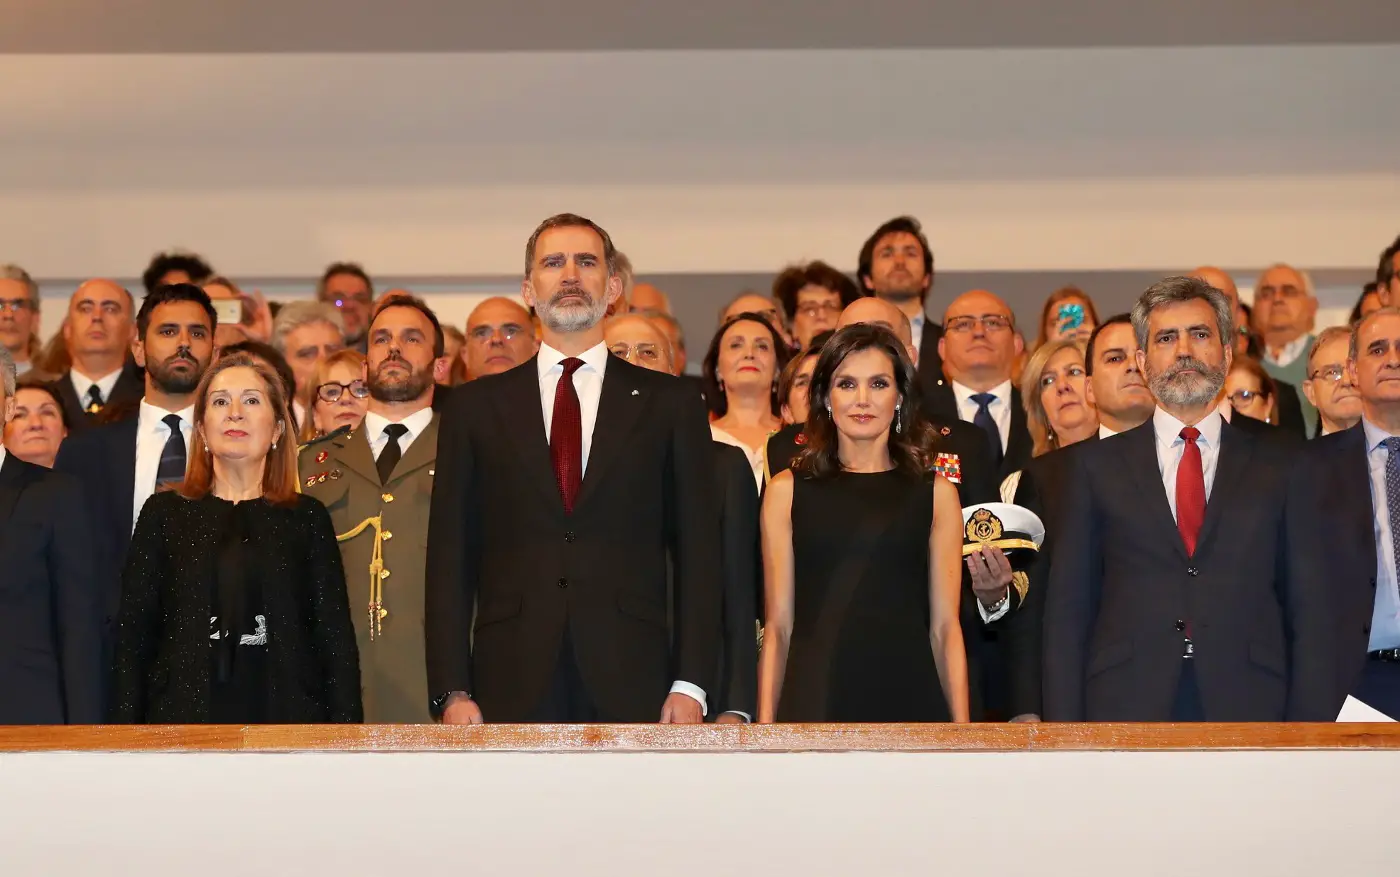 Upon their arrival at the National Music Auditorium, King and Queen were received by the President of the Congress